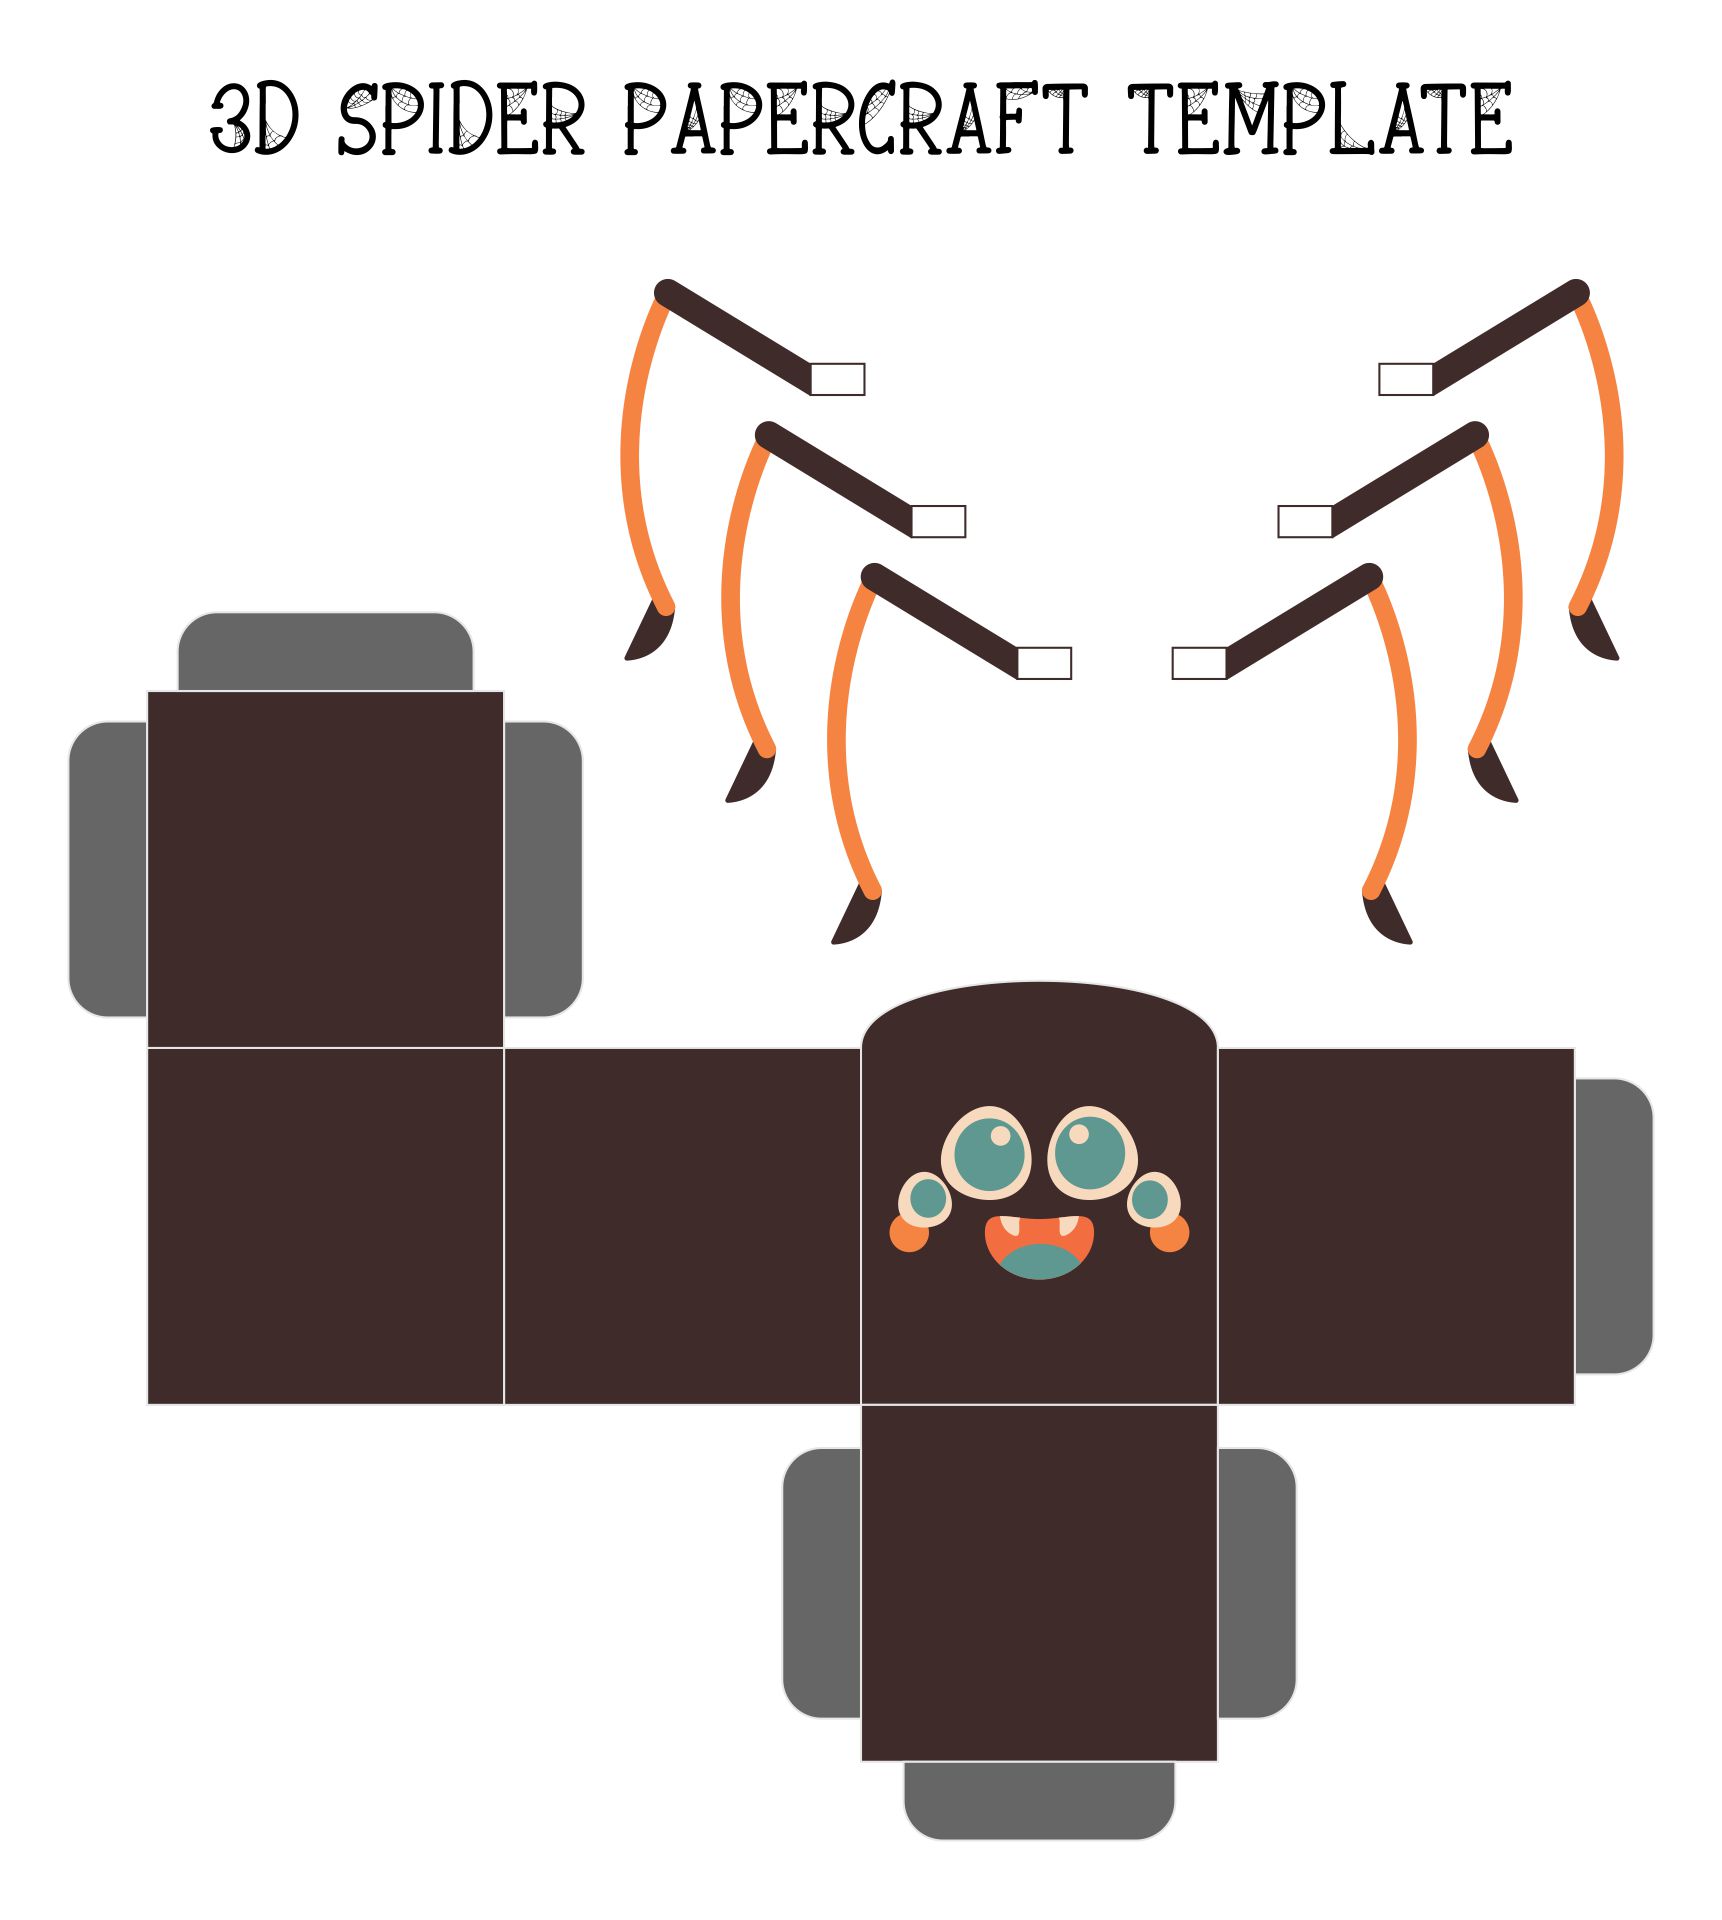 Printable 3D Spider Papercraft Template